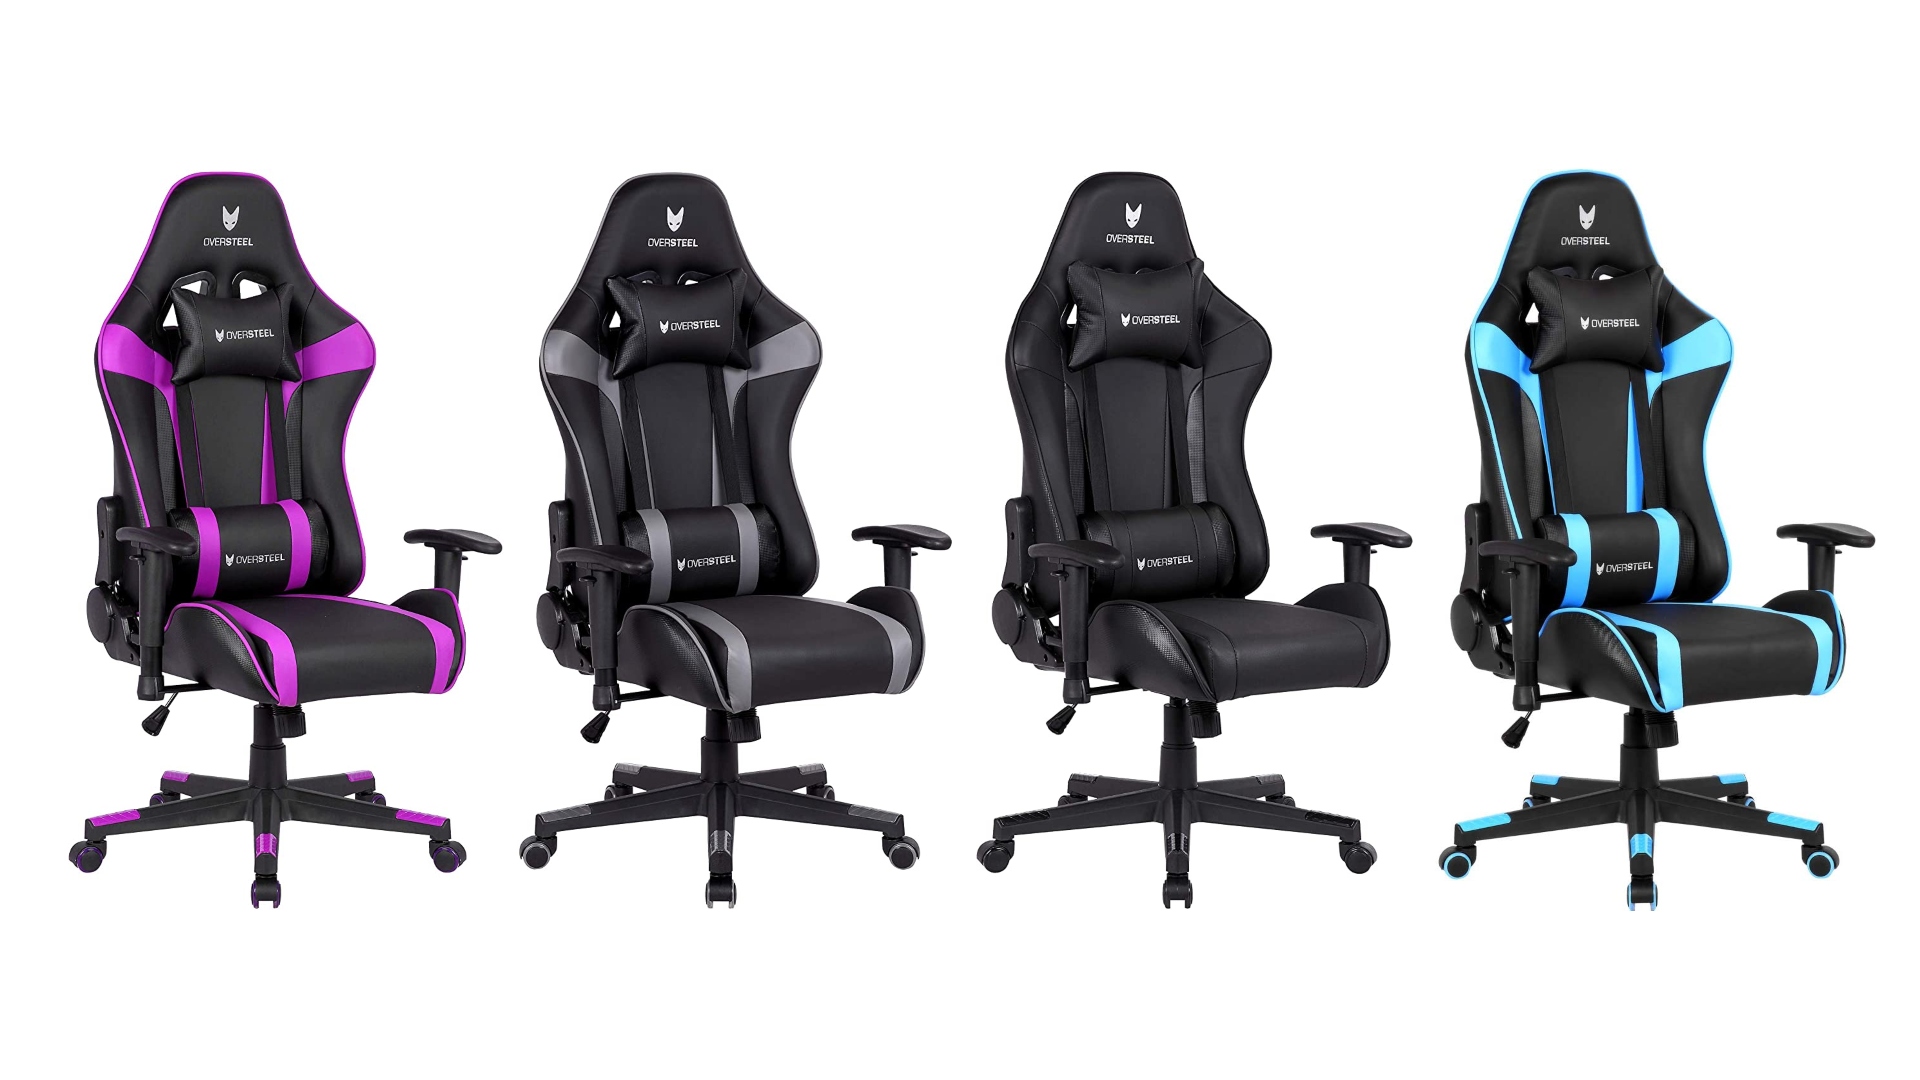 Best Amazon gaming chairs: the Oversteel Ultimet professional gaming chair. Image shows four different coloured chairs.